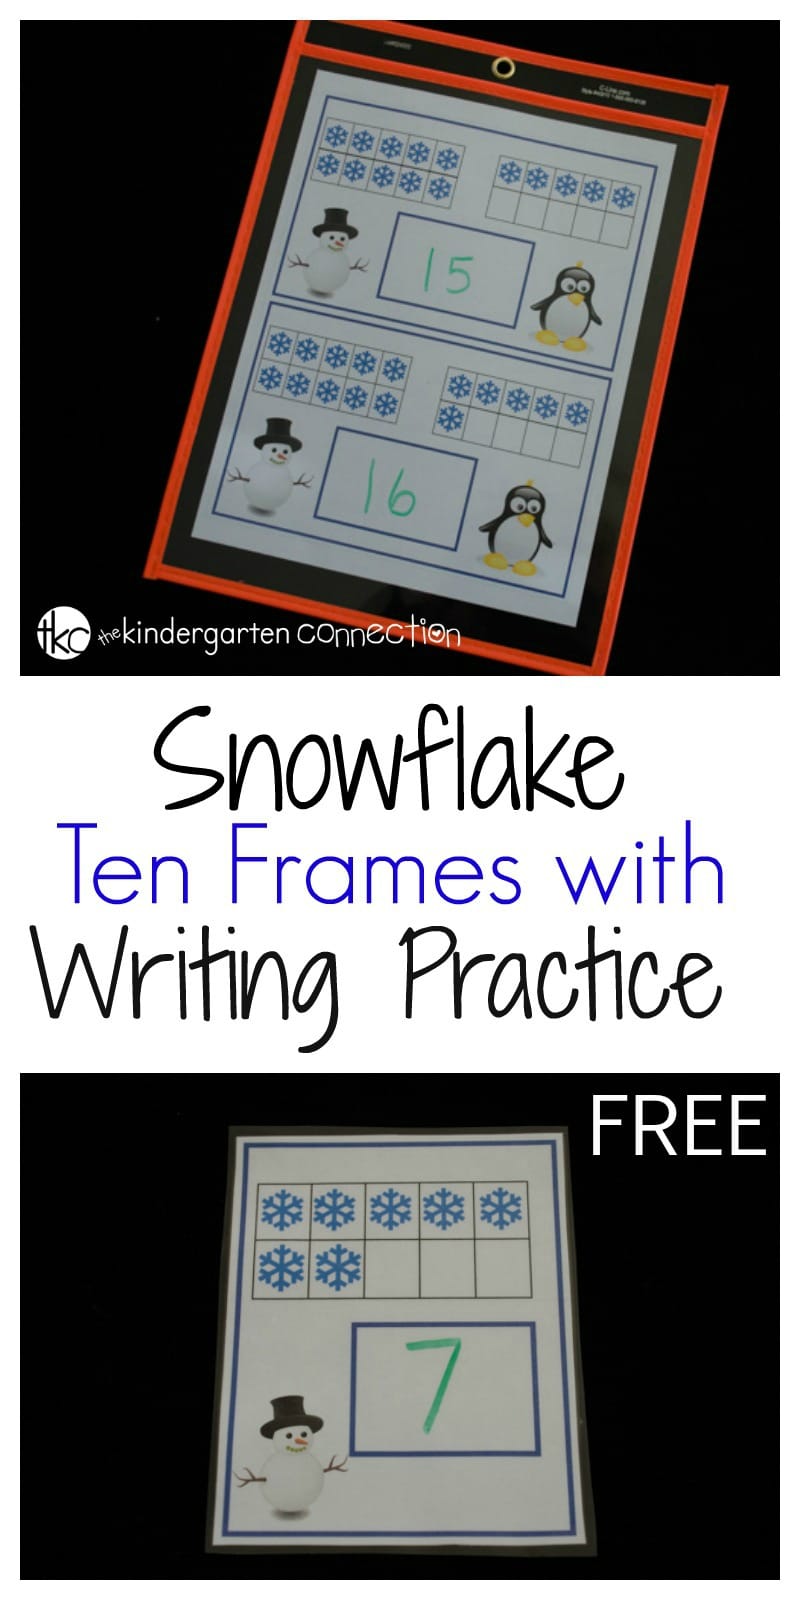 This winter themed snowflake ten frame is a great way to provide math and writing practice at the same time. What a fun winter math center for kids!